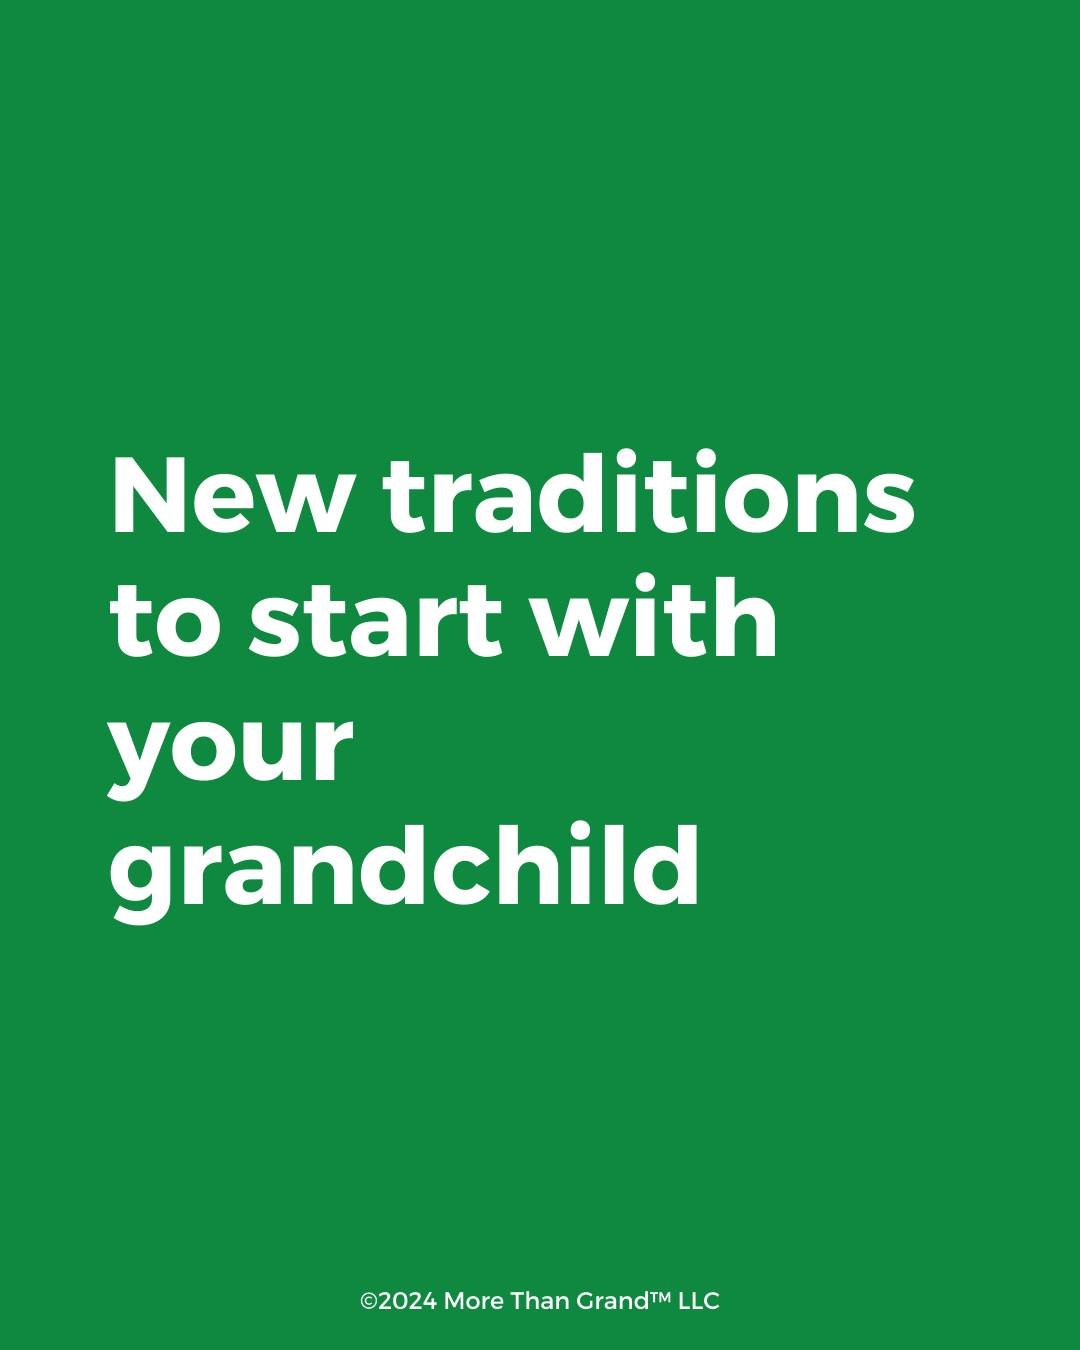 Family traditions and simple rituals tie us to one another in a powerful way. The things we repeat year after year, visit after visit, create core memories for our grandchildren. 

These collective memories stick with our grandchildren far longer tha